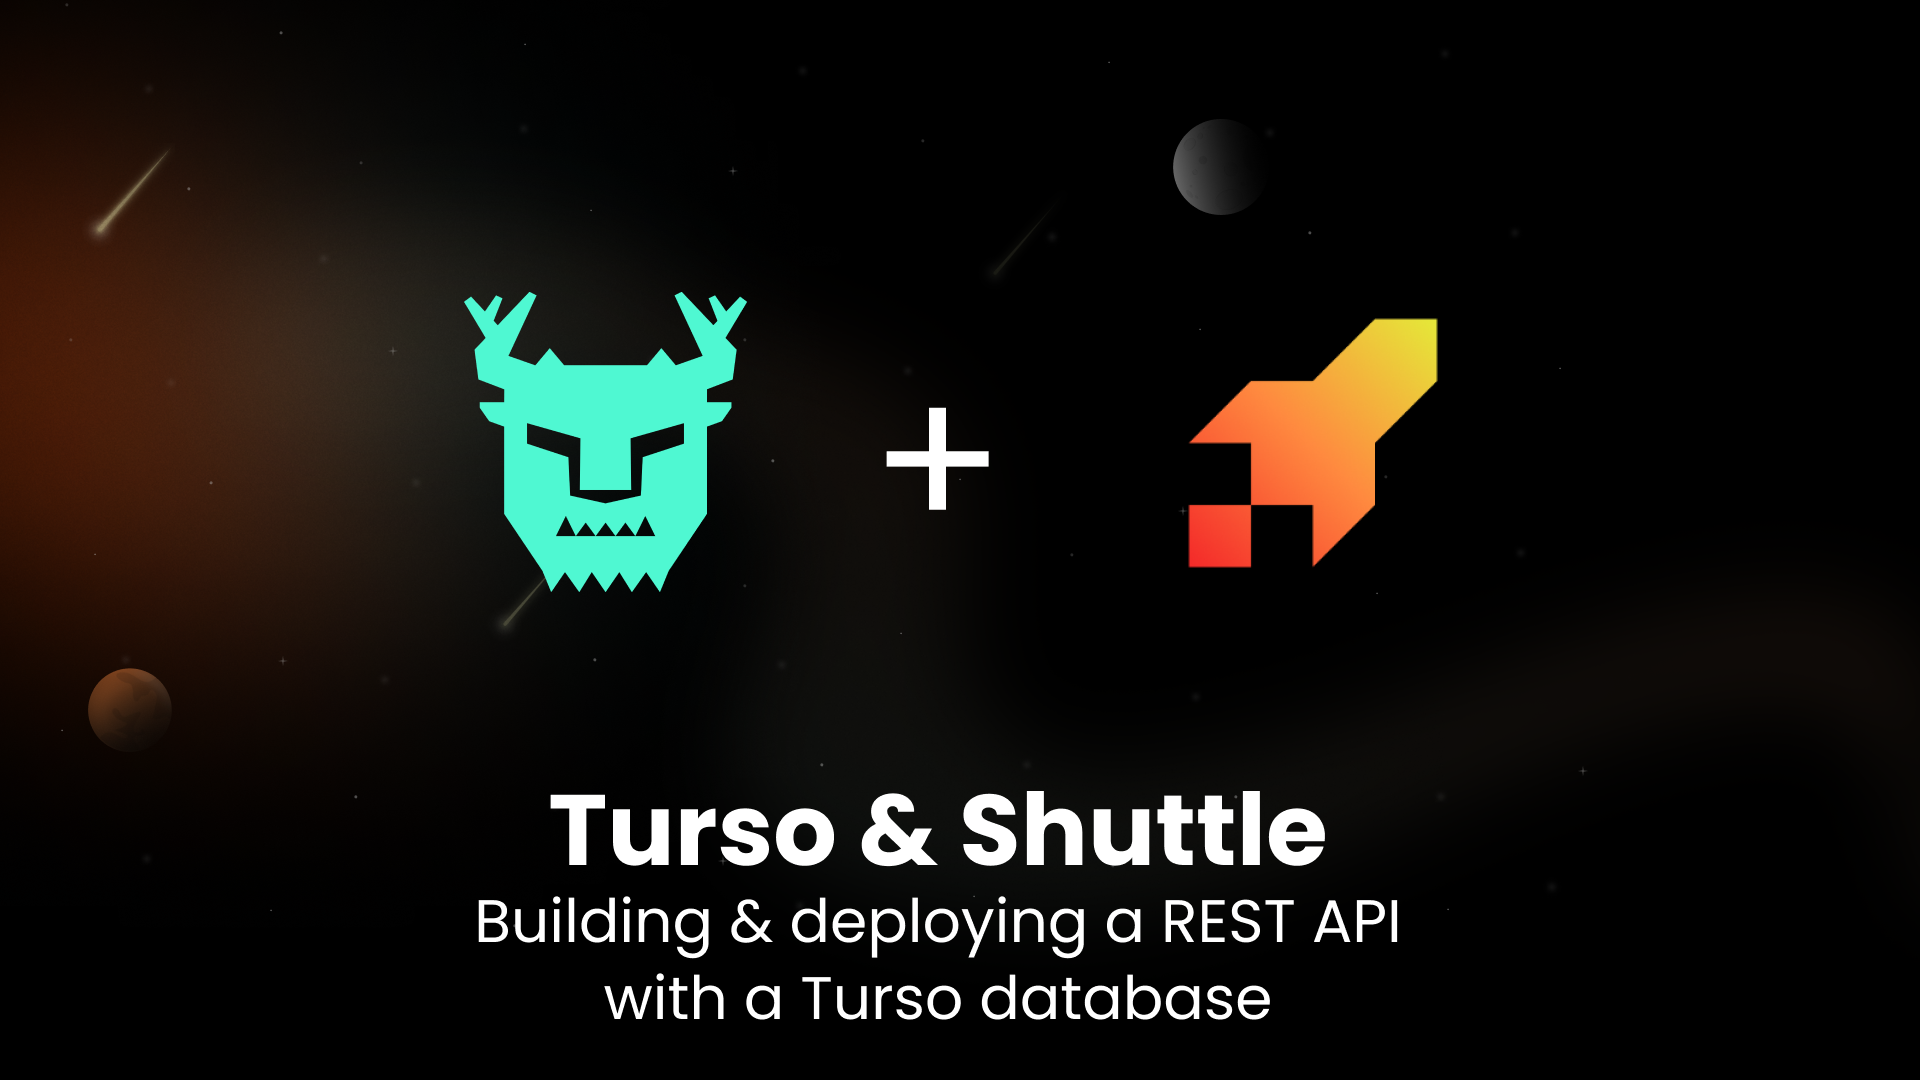 Turso & Shuttle | Building & deploying a REST API with a Turso database